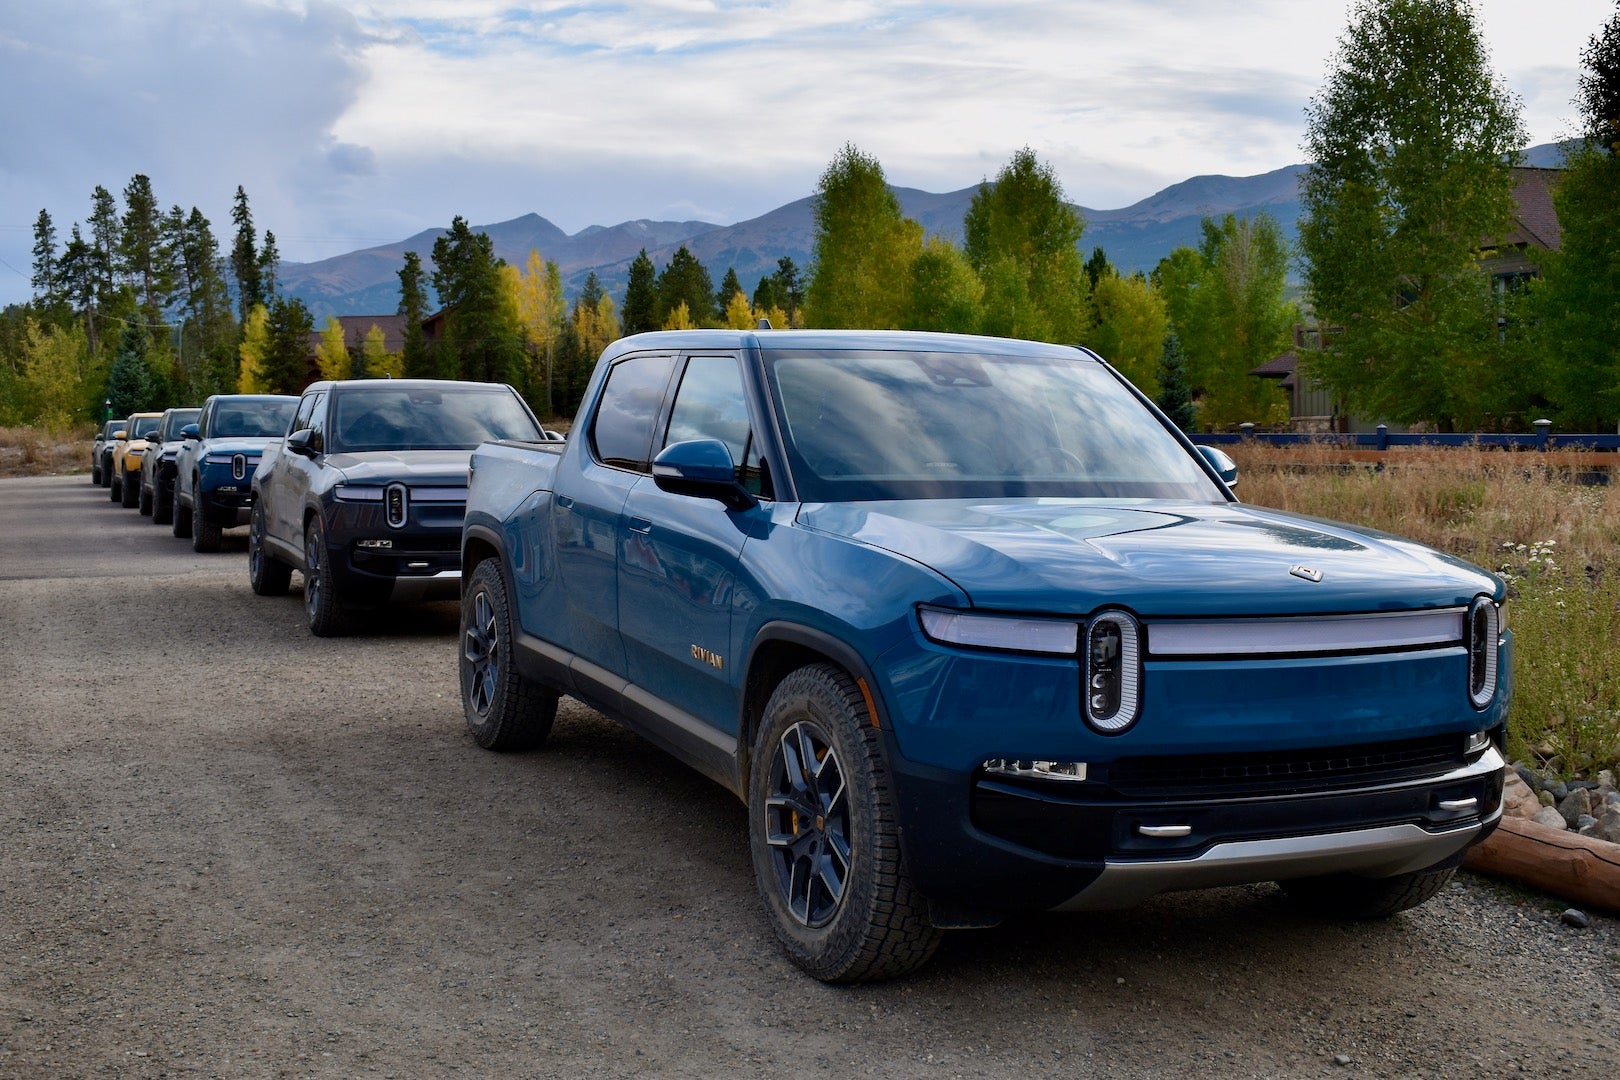 <p class="caption-title">2022 Rivian R1T Launch Edition lined up like ducks in a row</p>, <i>James Gilboy</i>